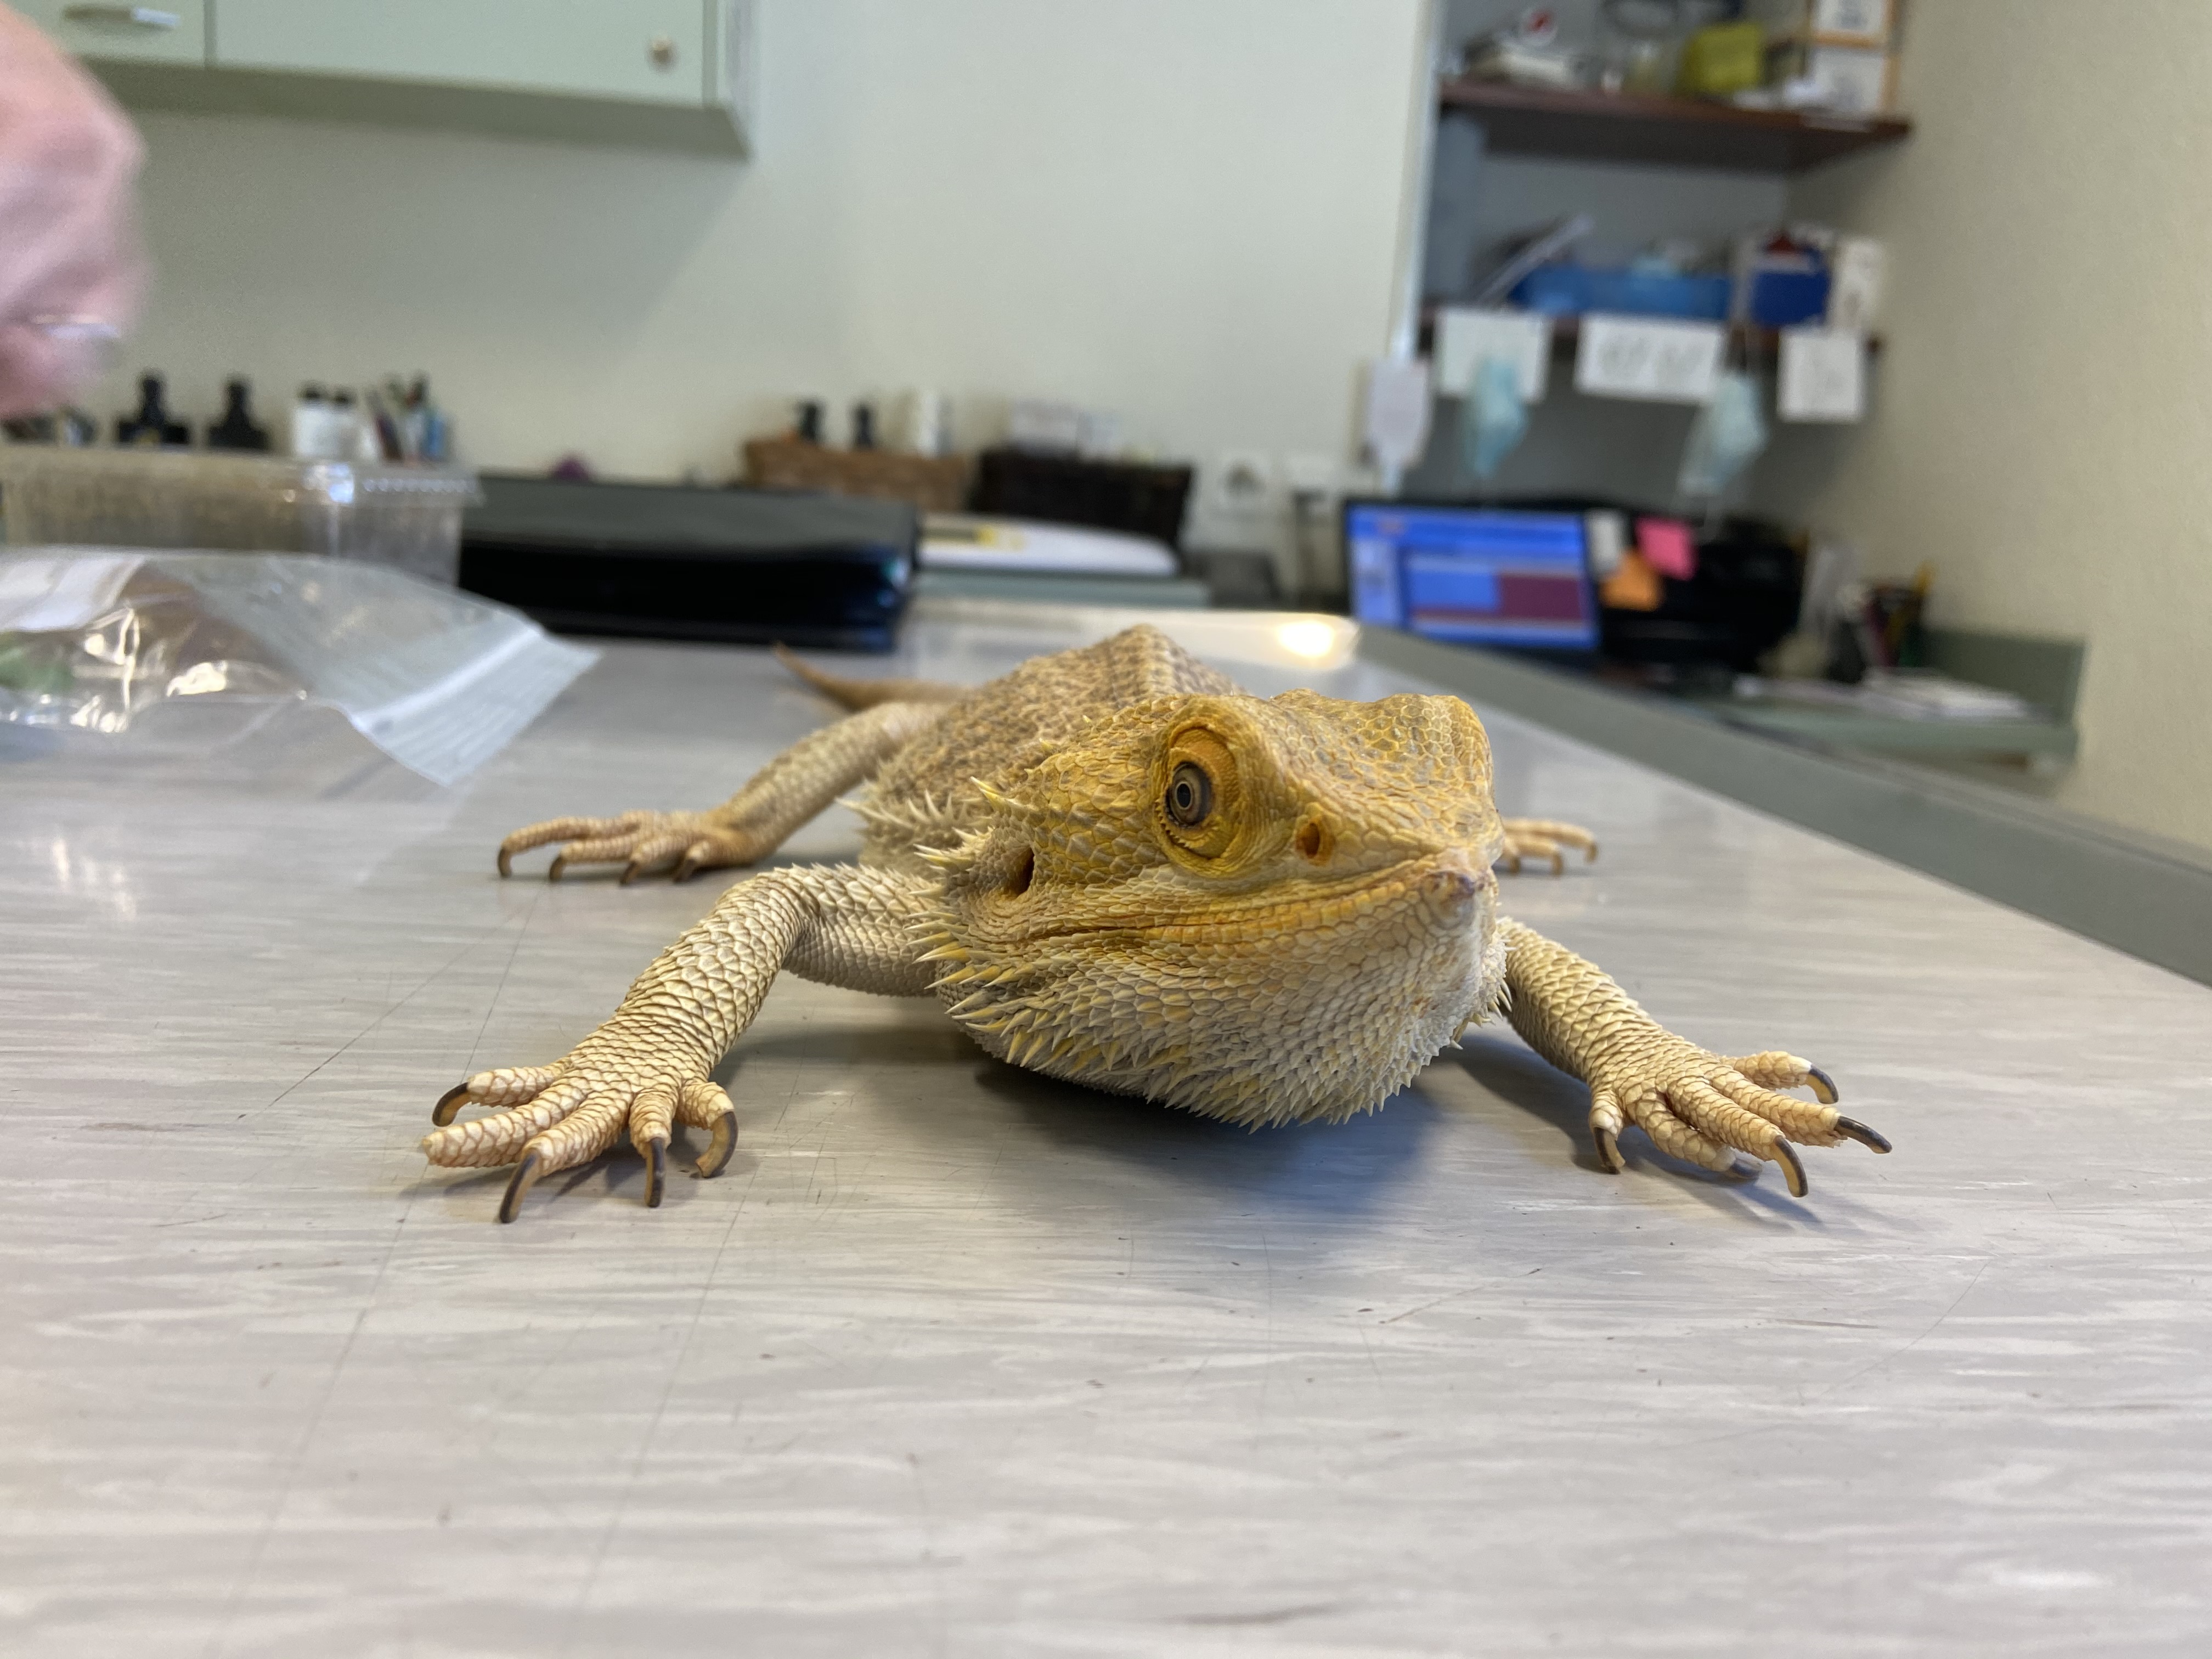 Skitter bearded dragon reptiles flying plane relocation homepets on board of aircrafts cargo temperature controlled animal travel